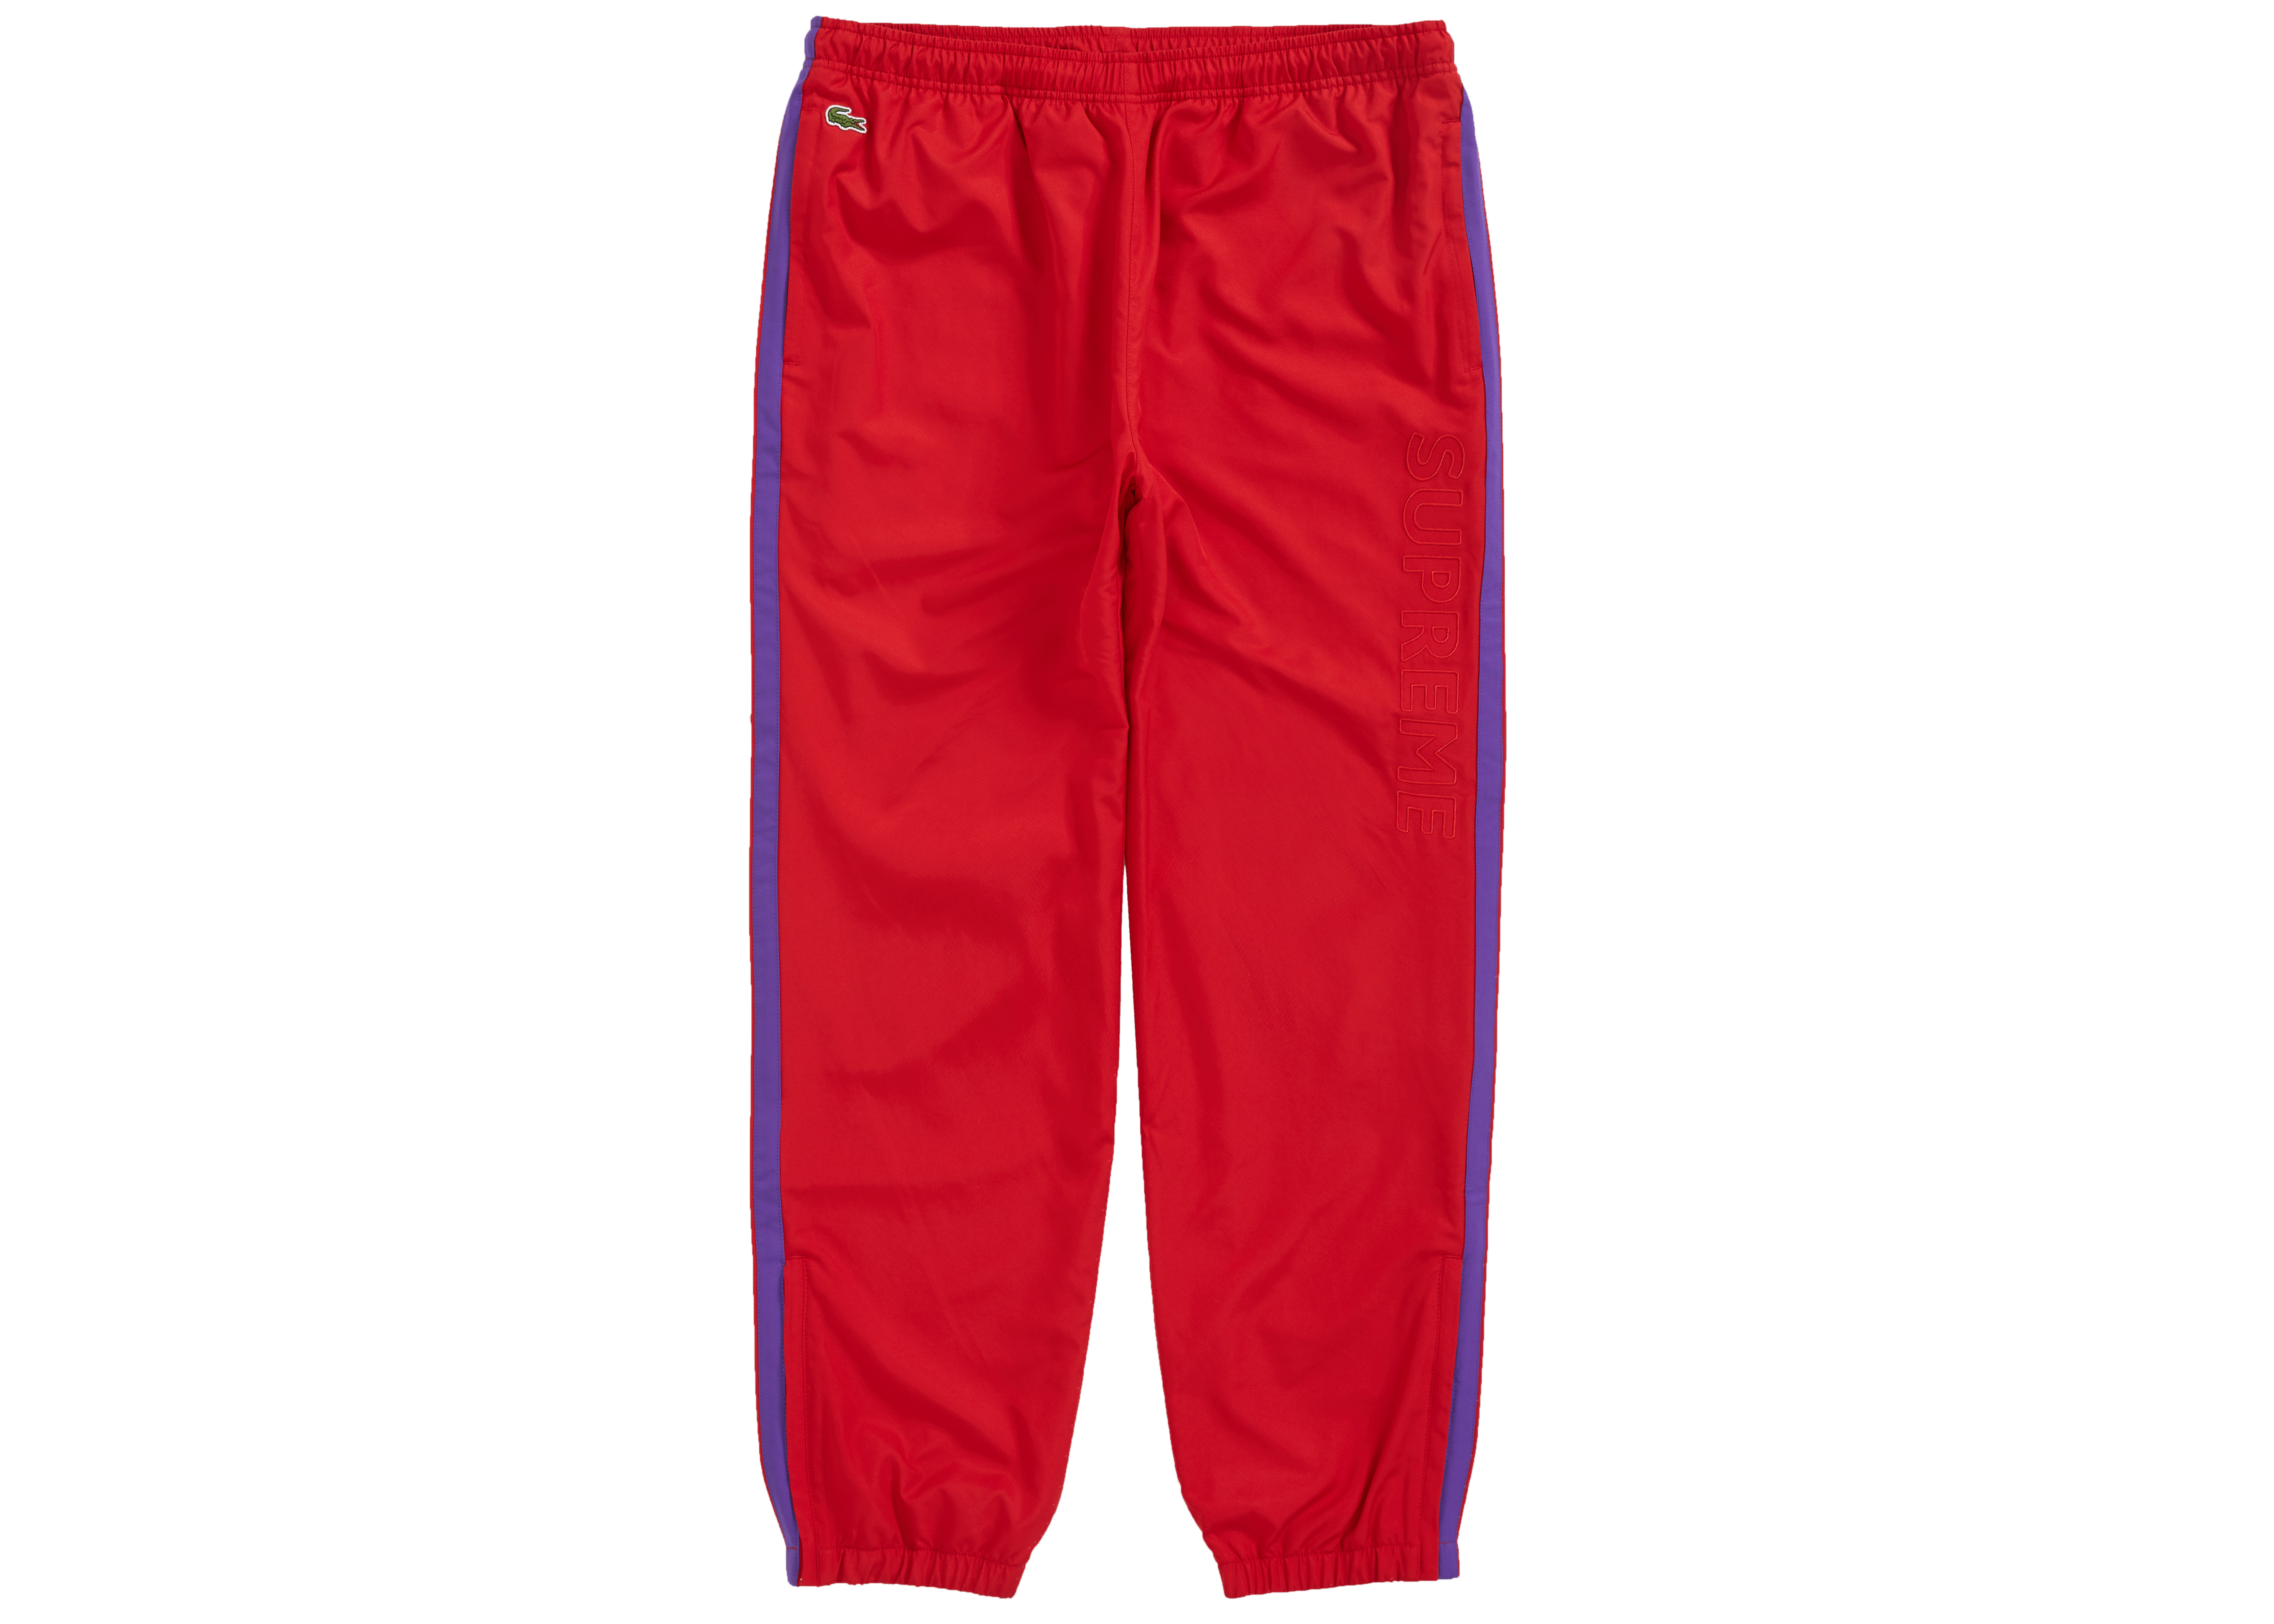 Supreme LACOSTE Track Pant (FW19) Red Men's - FW19 - US